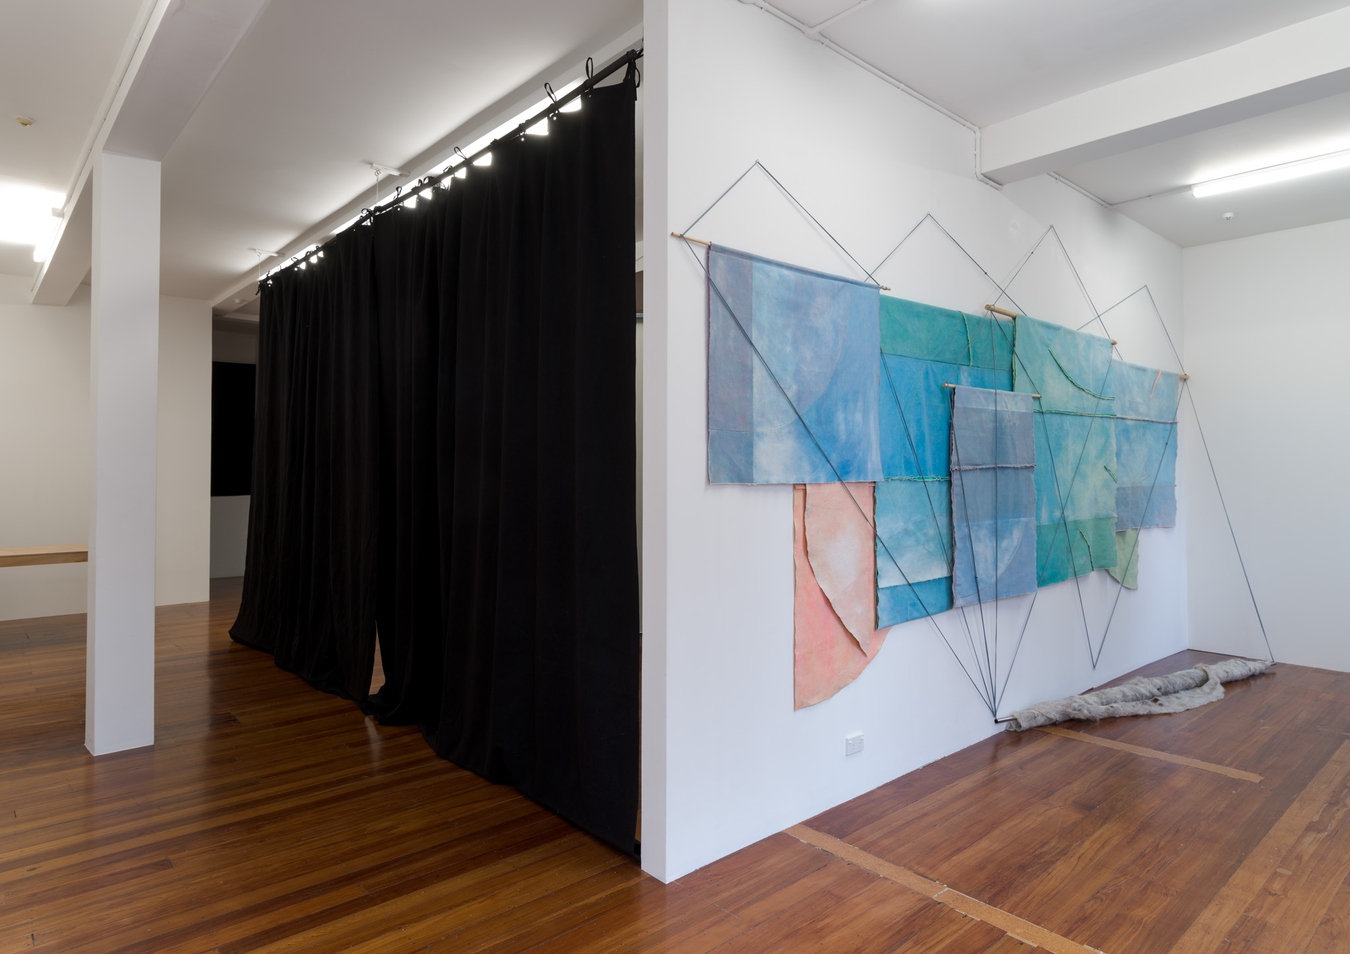 Image: Emma Fitts, From heat to translucence / your mineral touch (installation view), 2023. Weathered canvas, felted wool, aluminium and wooden rods, fabric ties. Photo by John Collie.